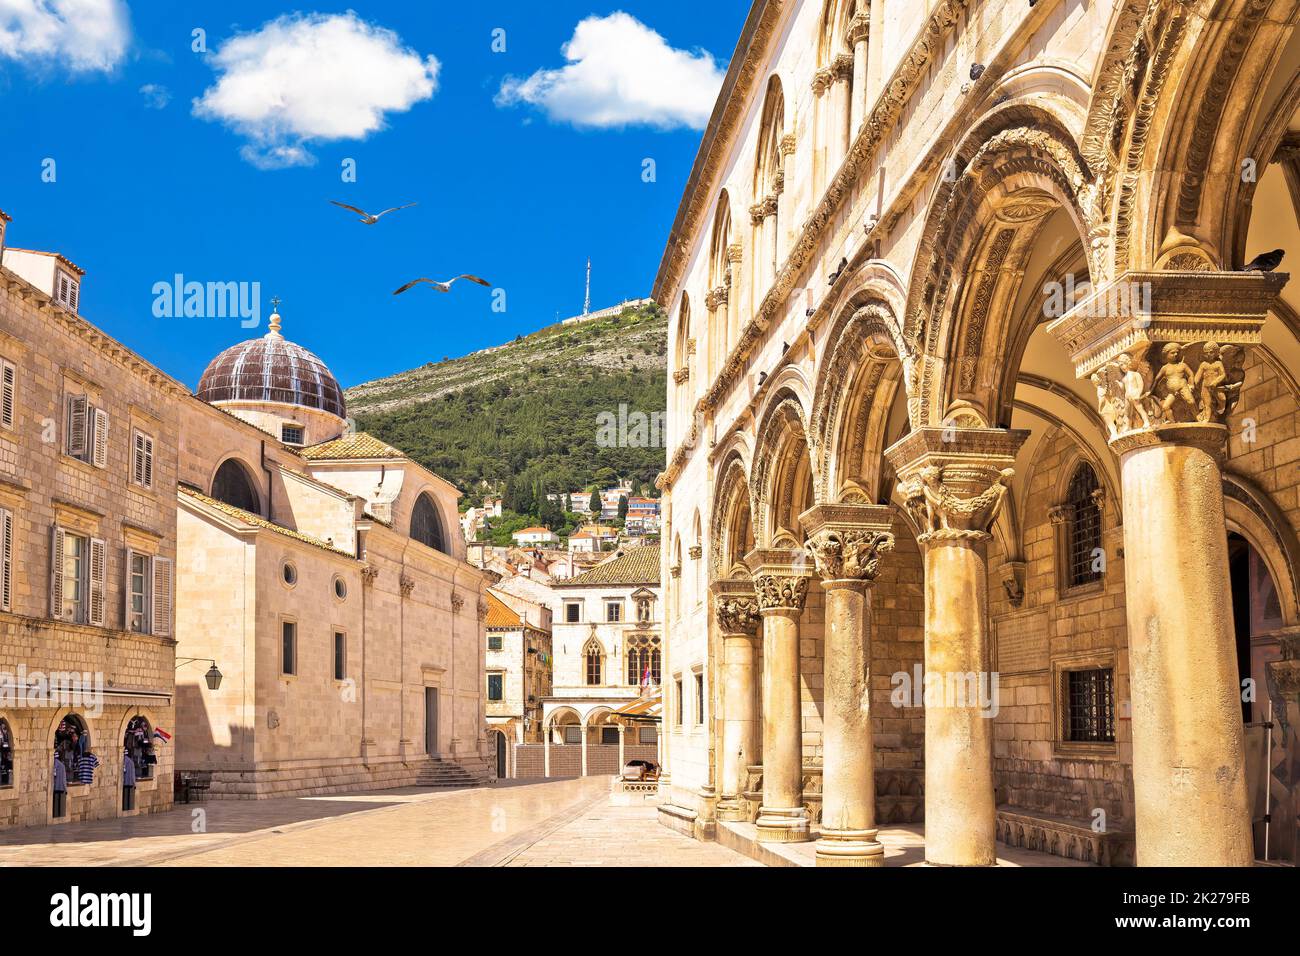 Dubrovnik. Carved stone street architecture street of Dubrovnik view Stock Photo